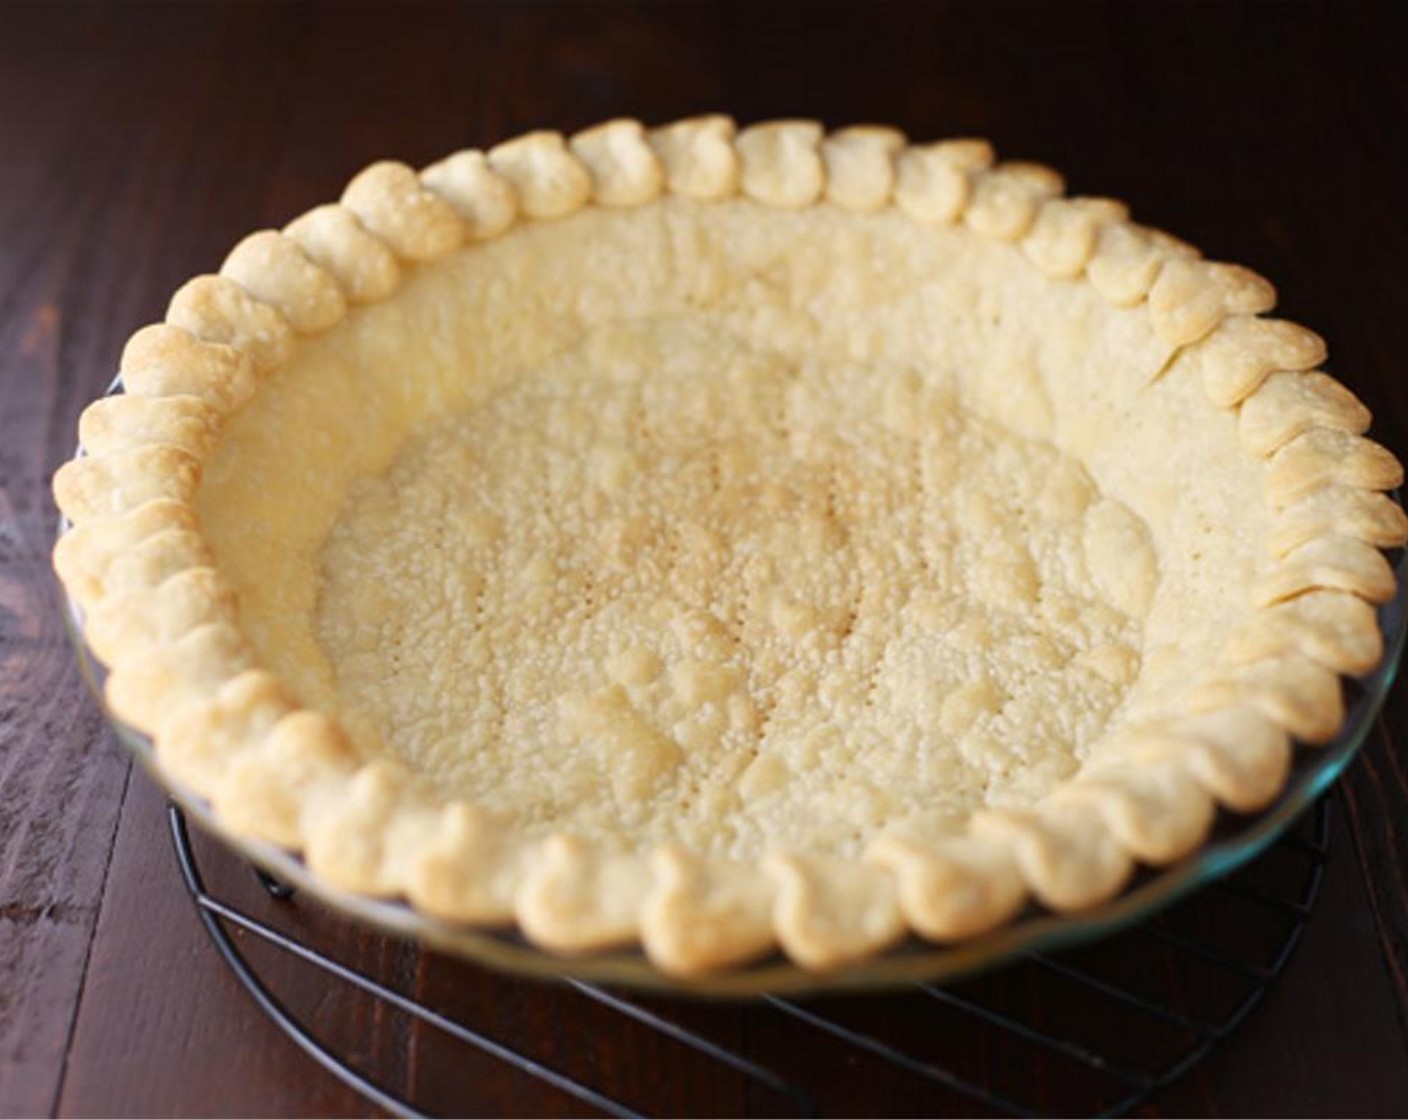 step 6 Bake pie crust for 15-18 minutes or until edges are light golden brown. Let cool.